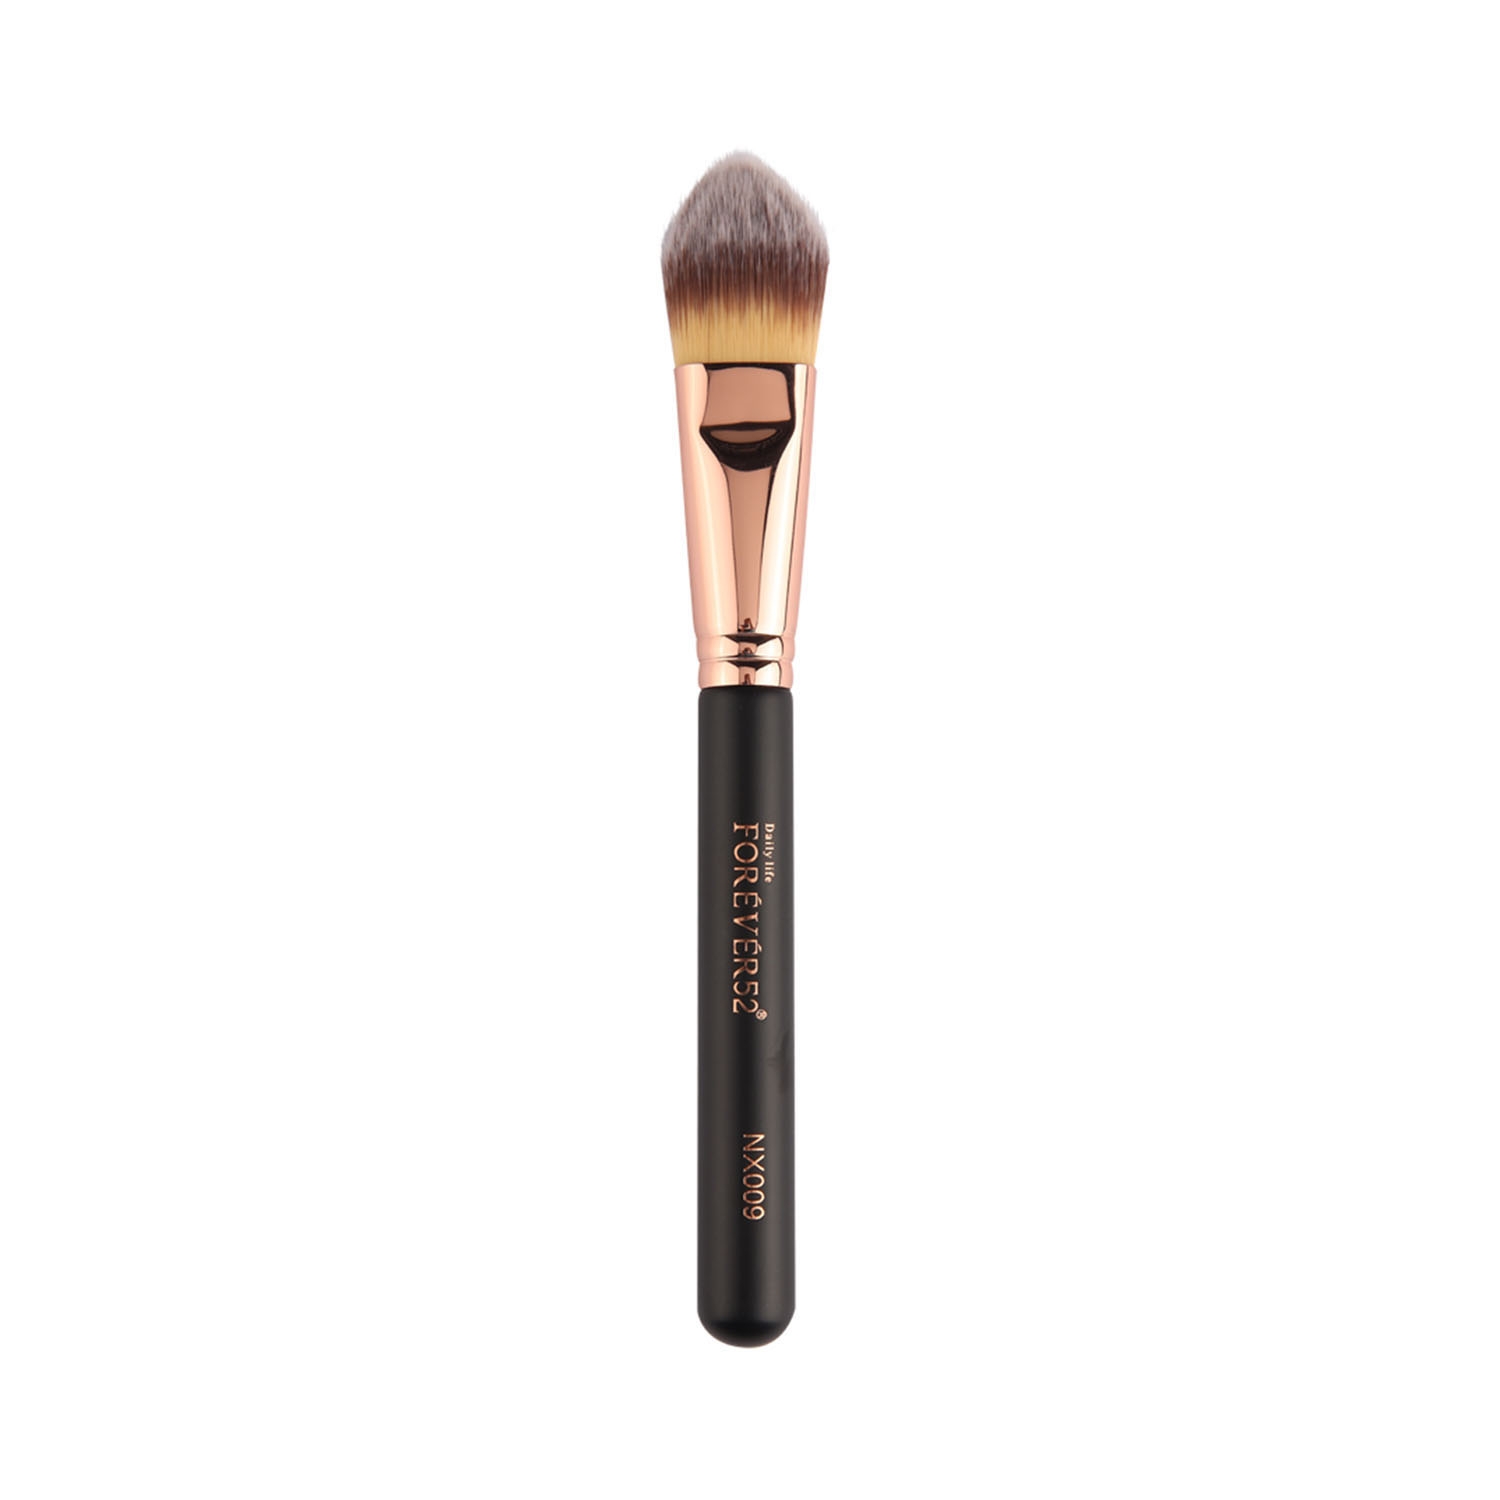 Daily Life Forever52 | Daily Life Forever52 Foundation Brush - NX009 (1Pc)